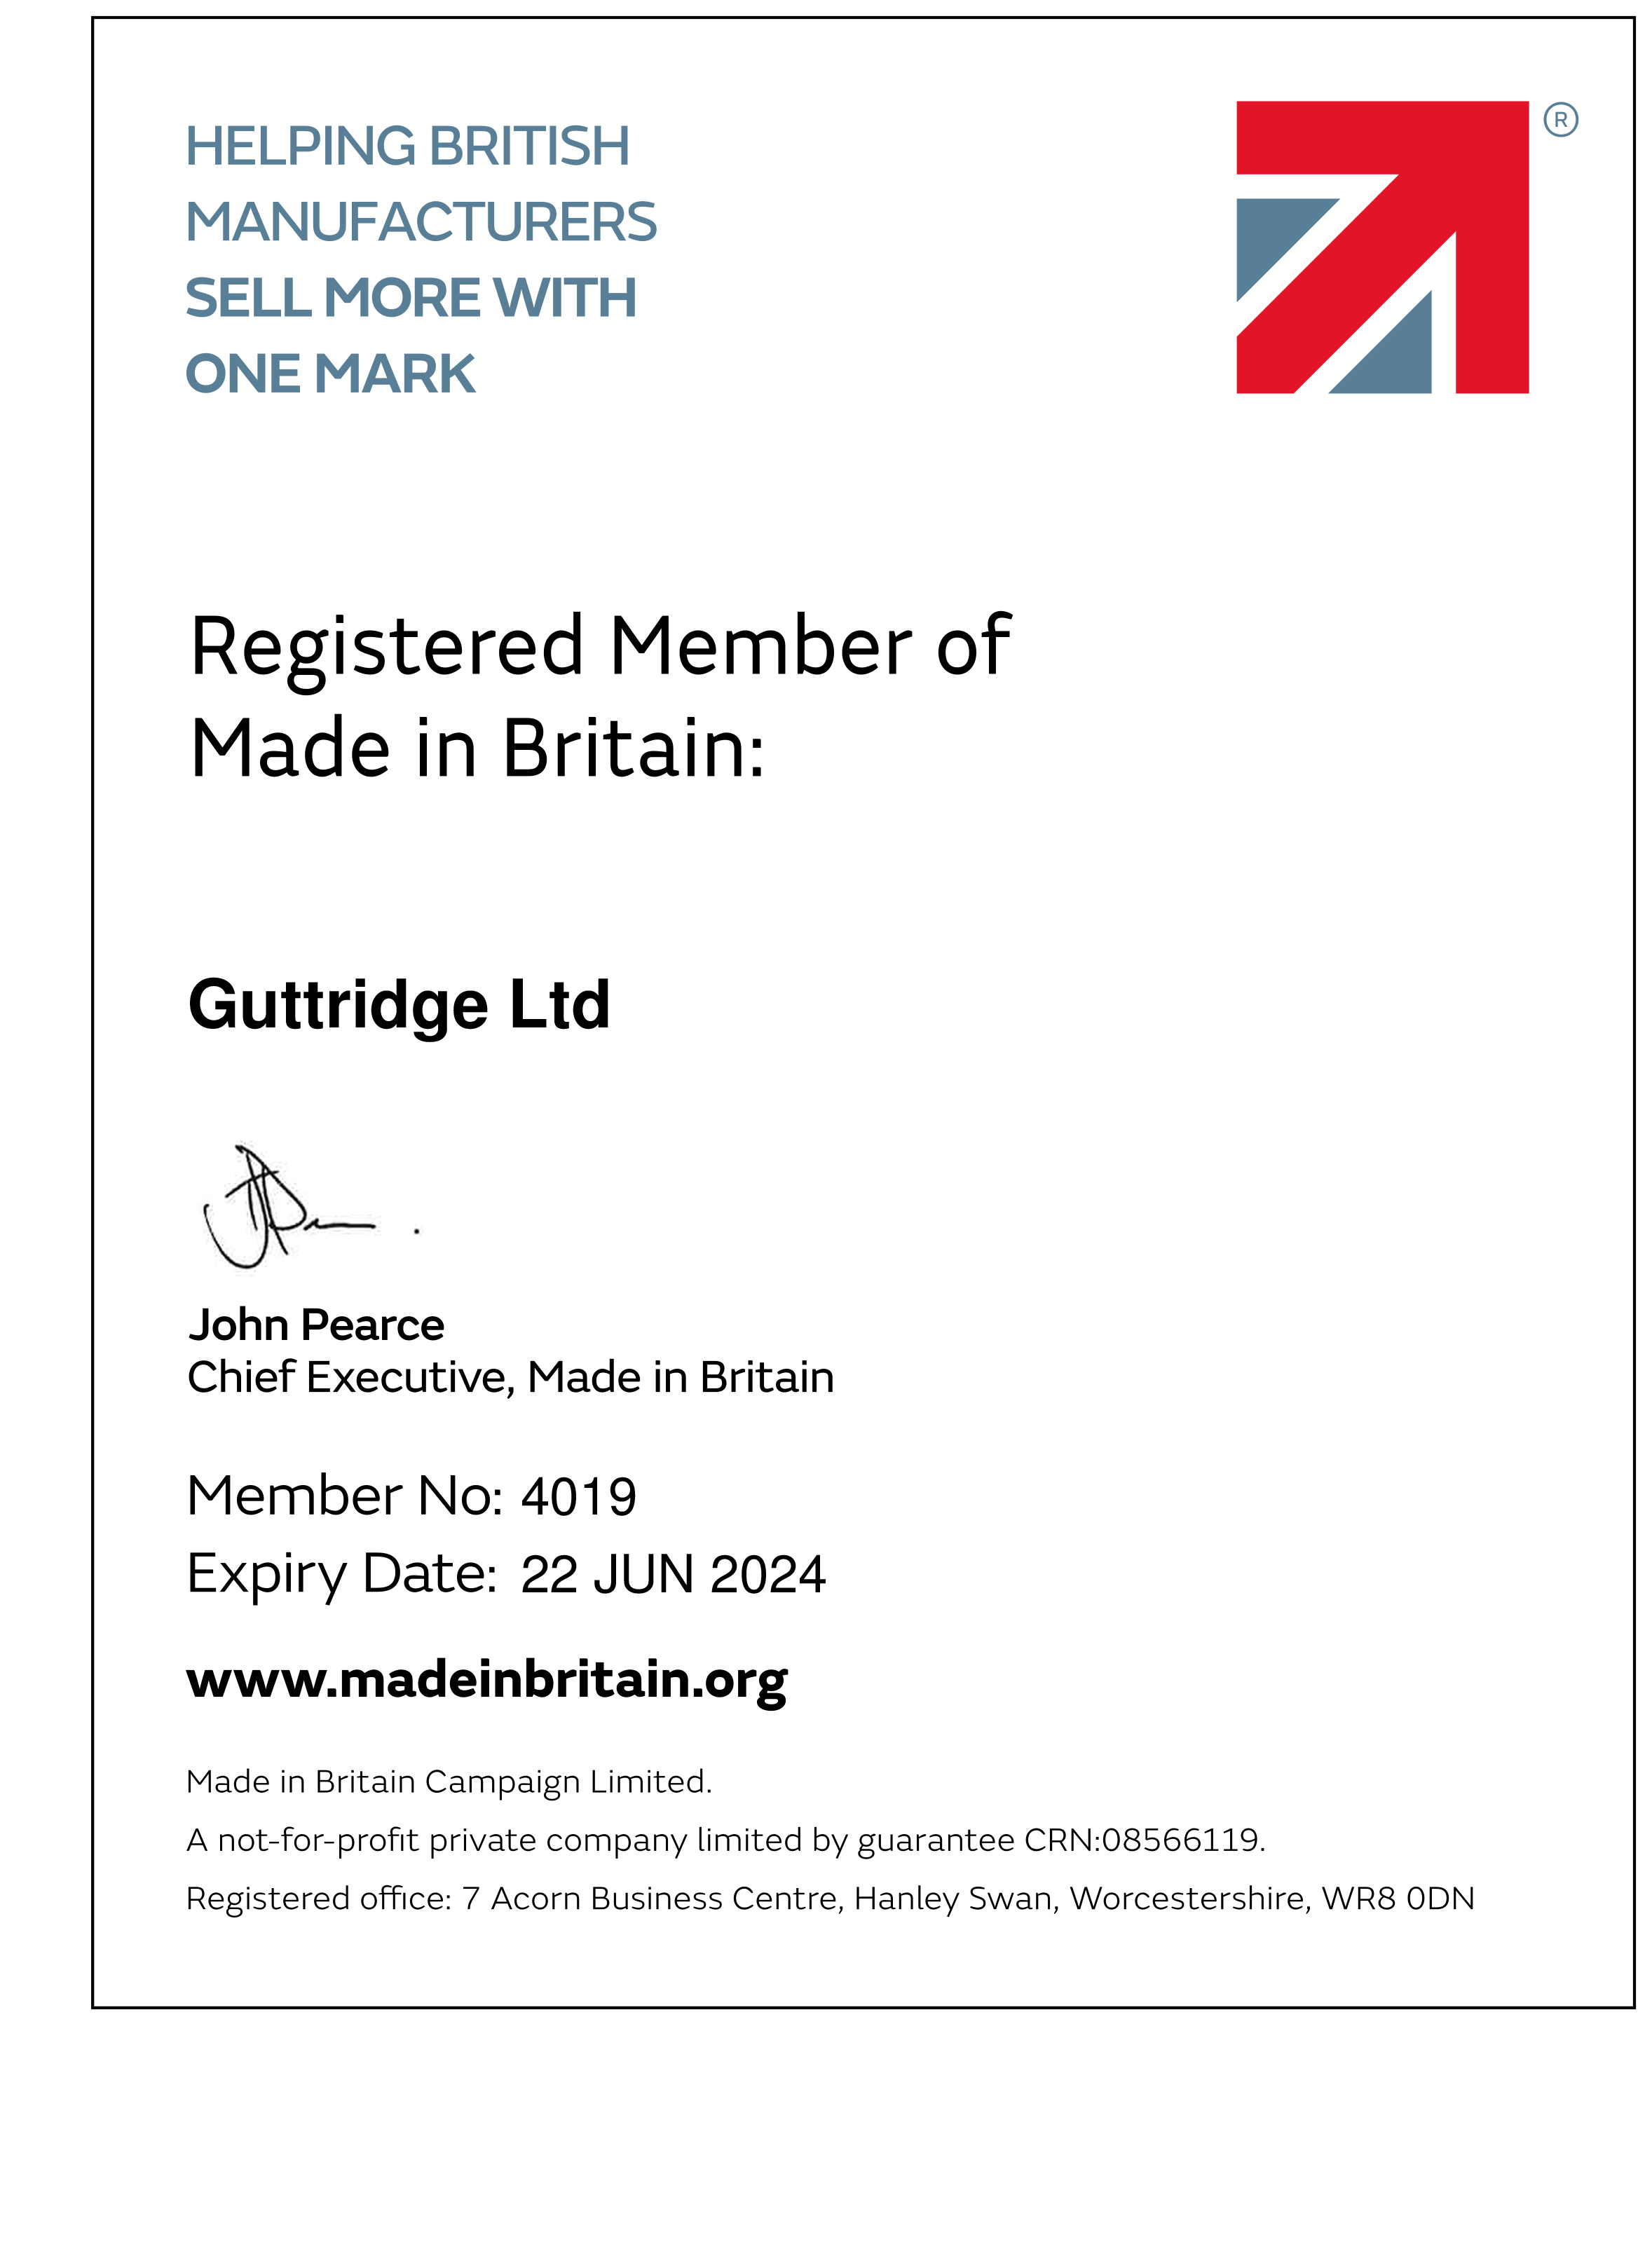 Guttridge Ltd joins “Made in Britain” to showcase British Manufacturing Excellence.